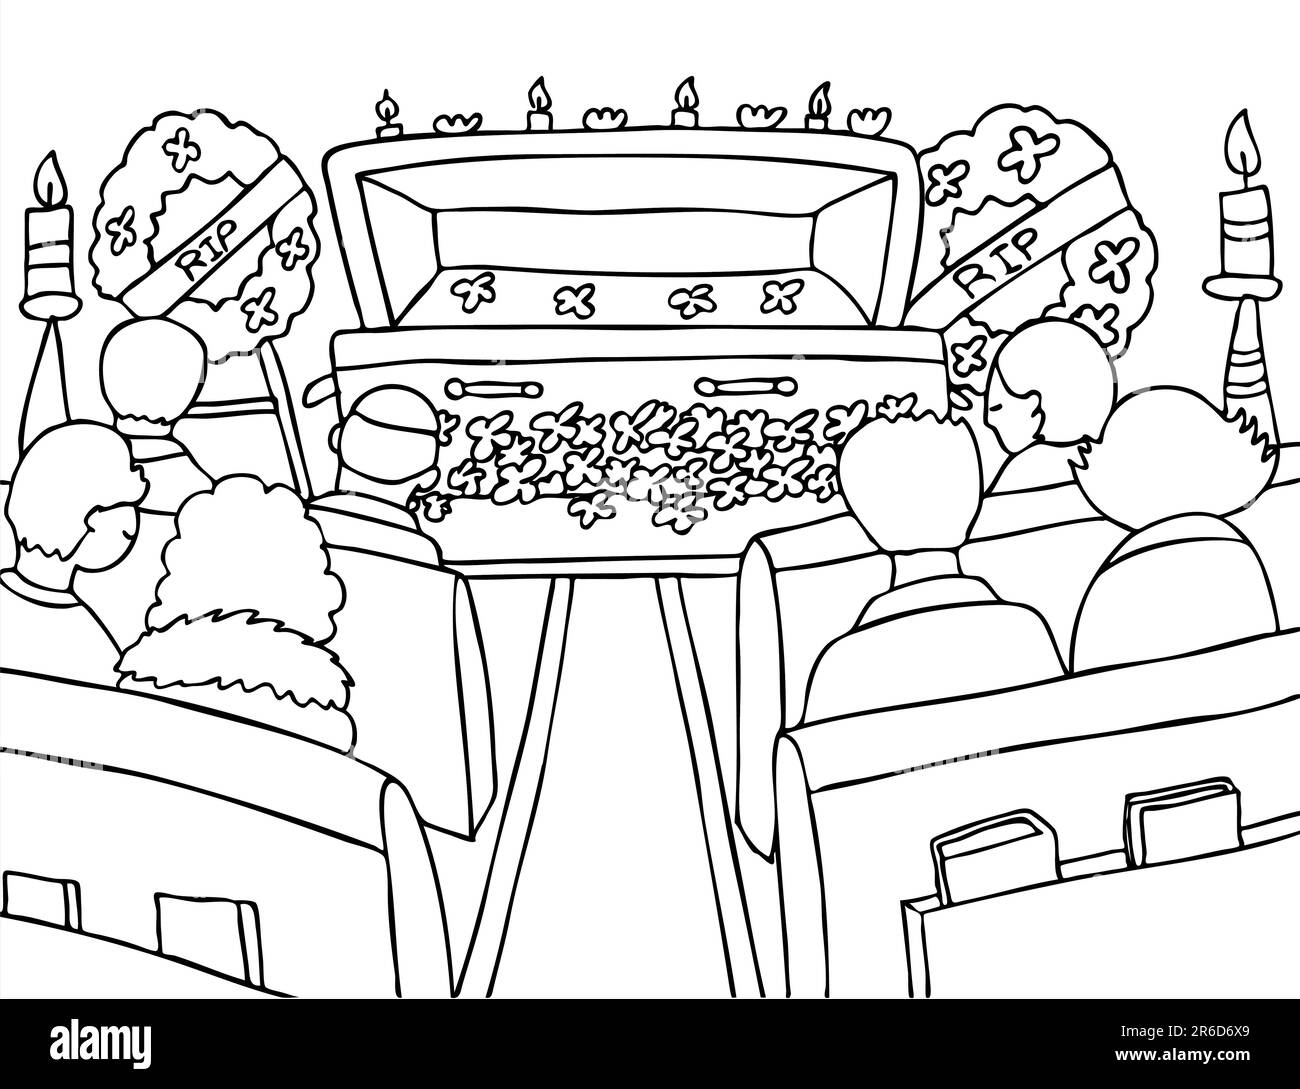 People mourn a lost loved one at a funeral - black and white version. Stock Vector